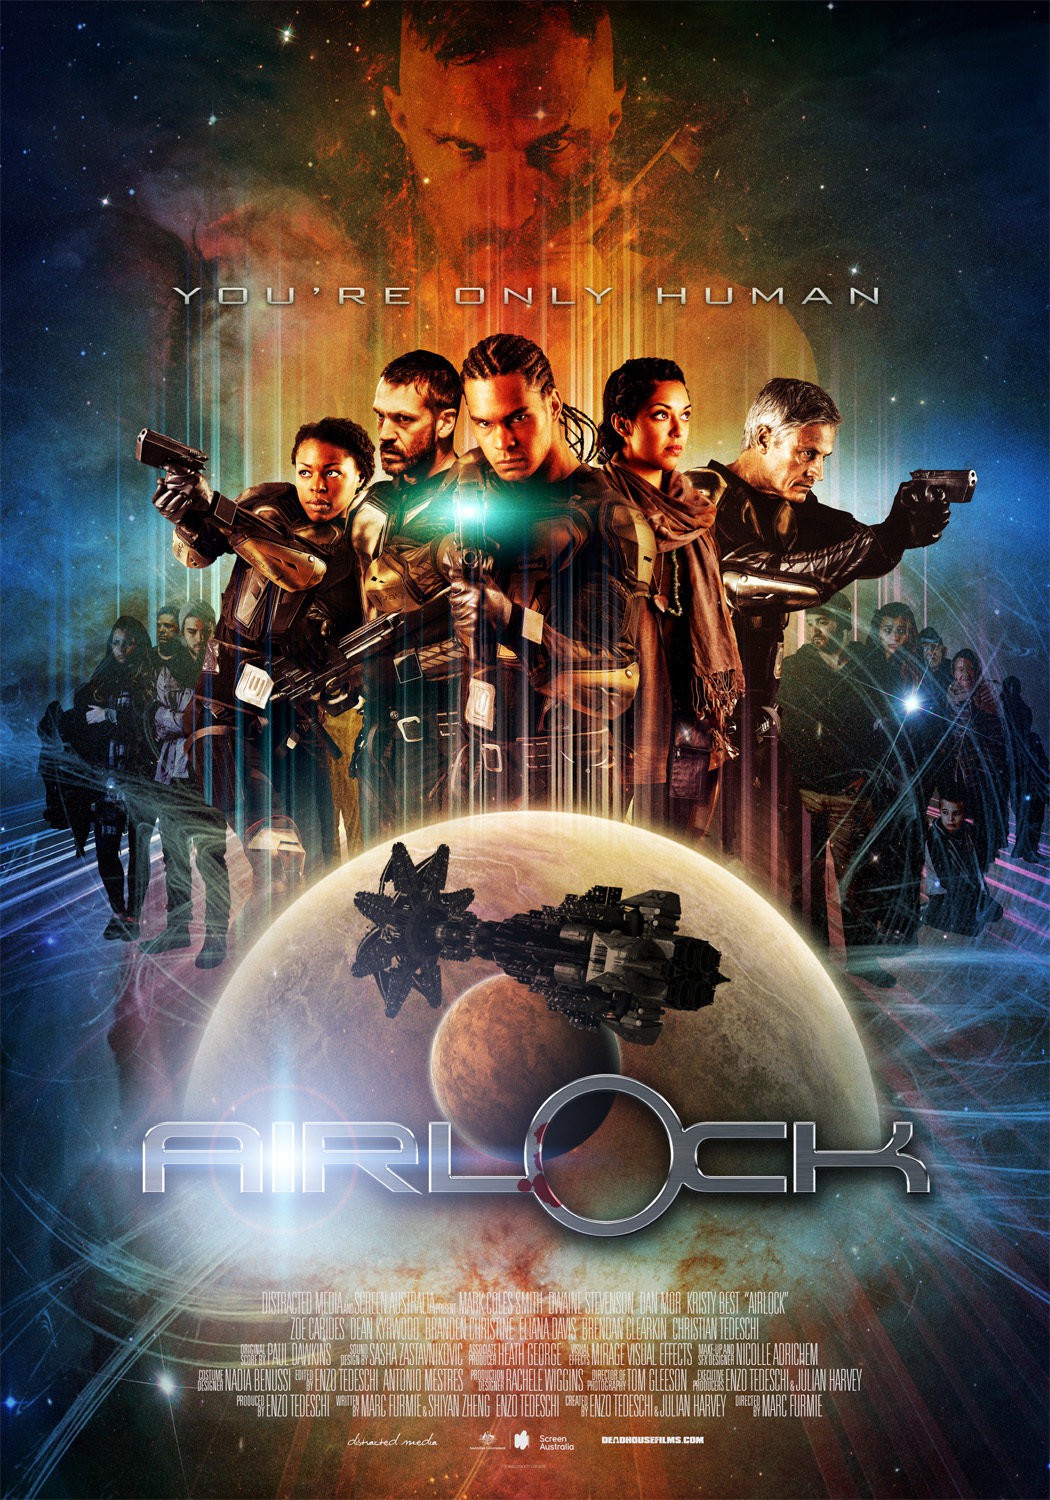 Extra Large TV Poster Image for Airlock 